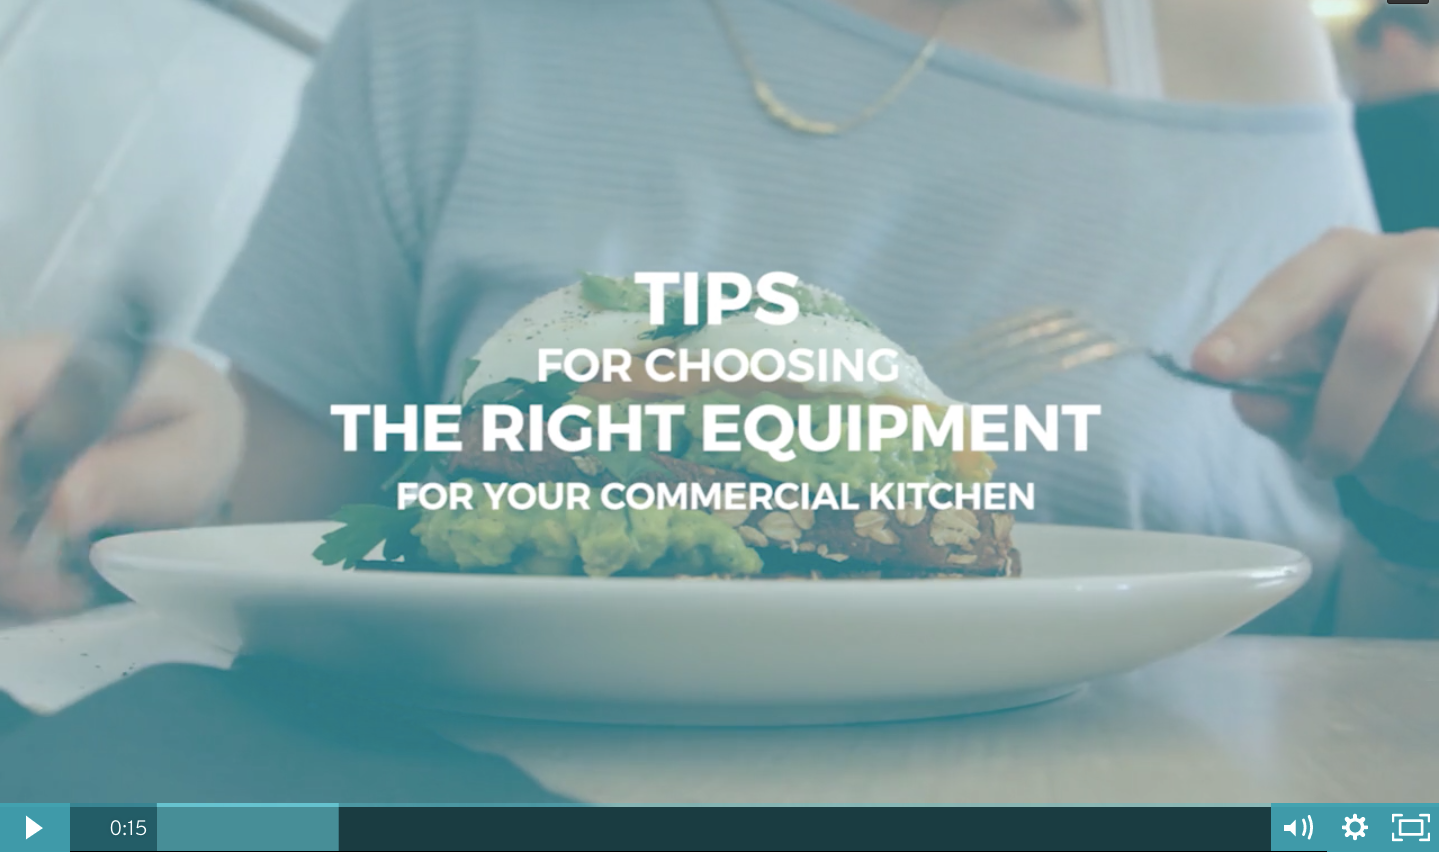 How to Choose Equipment for your Kitchen?